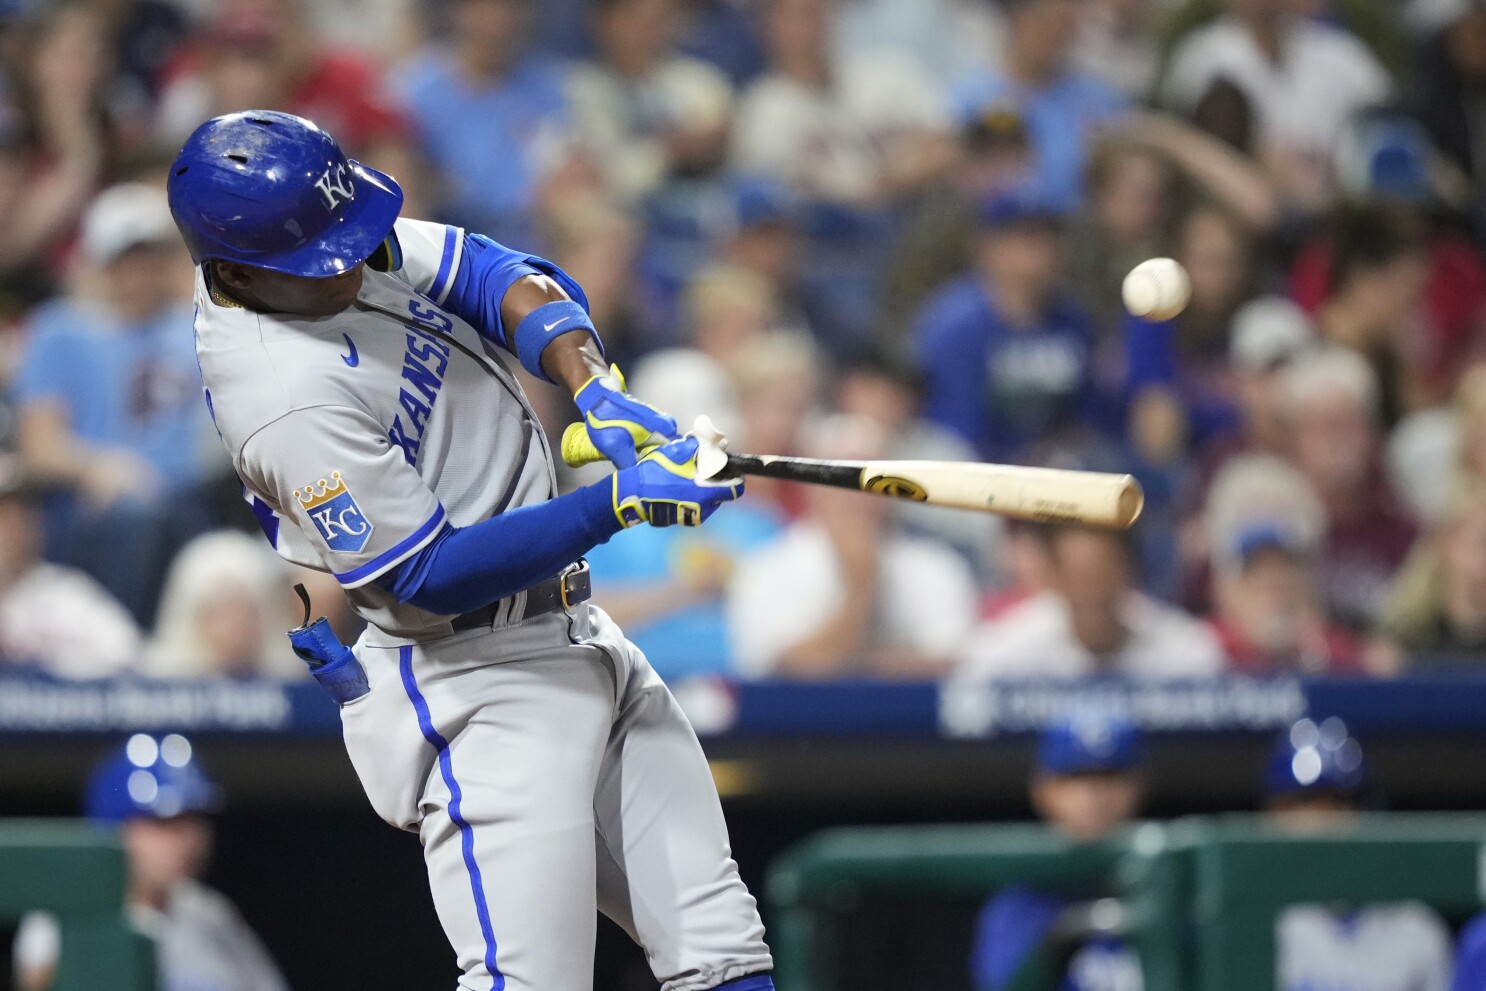 Kansas City Royals get two hits in Opening Day loss to Twins